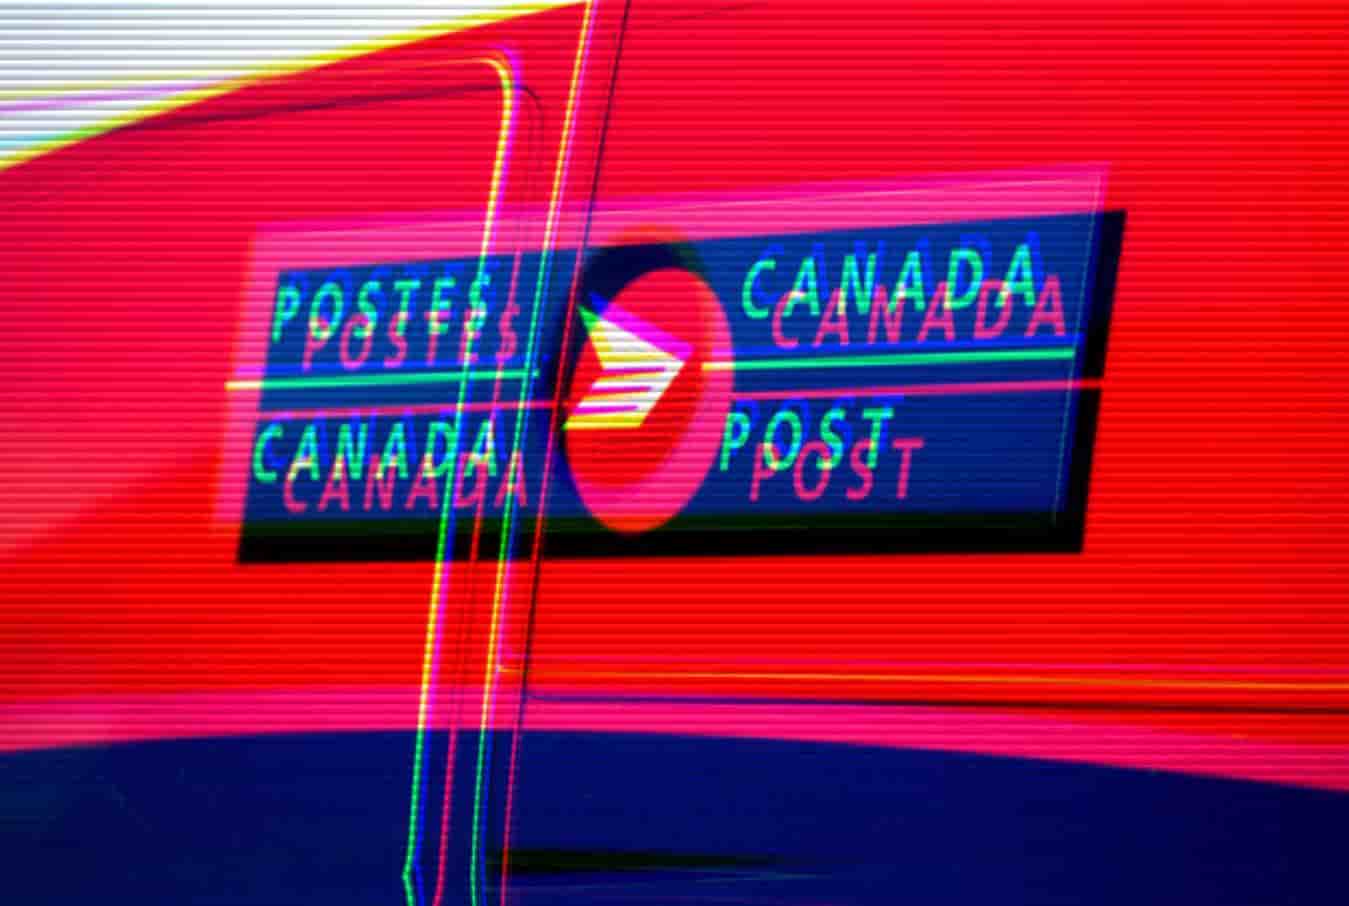 Canadian Post discloses data breach after malware attack